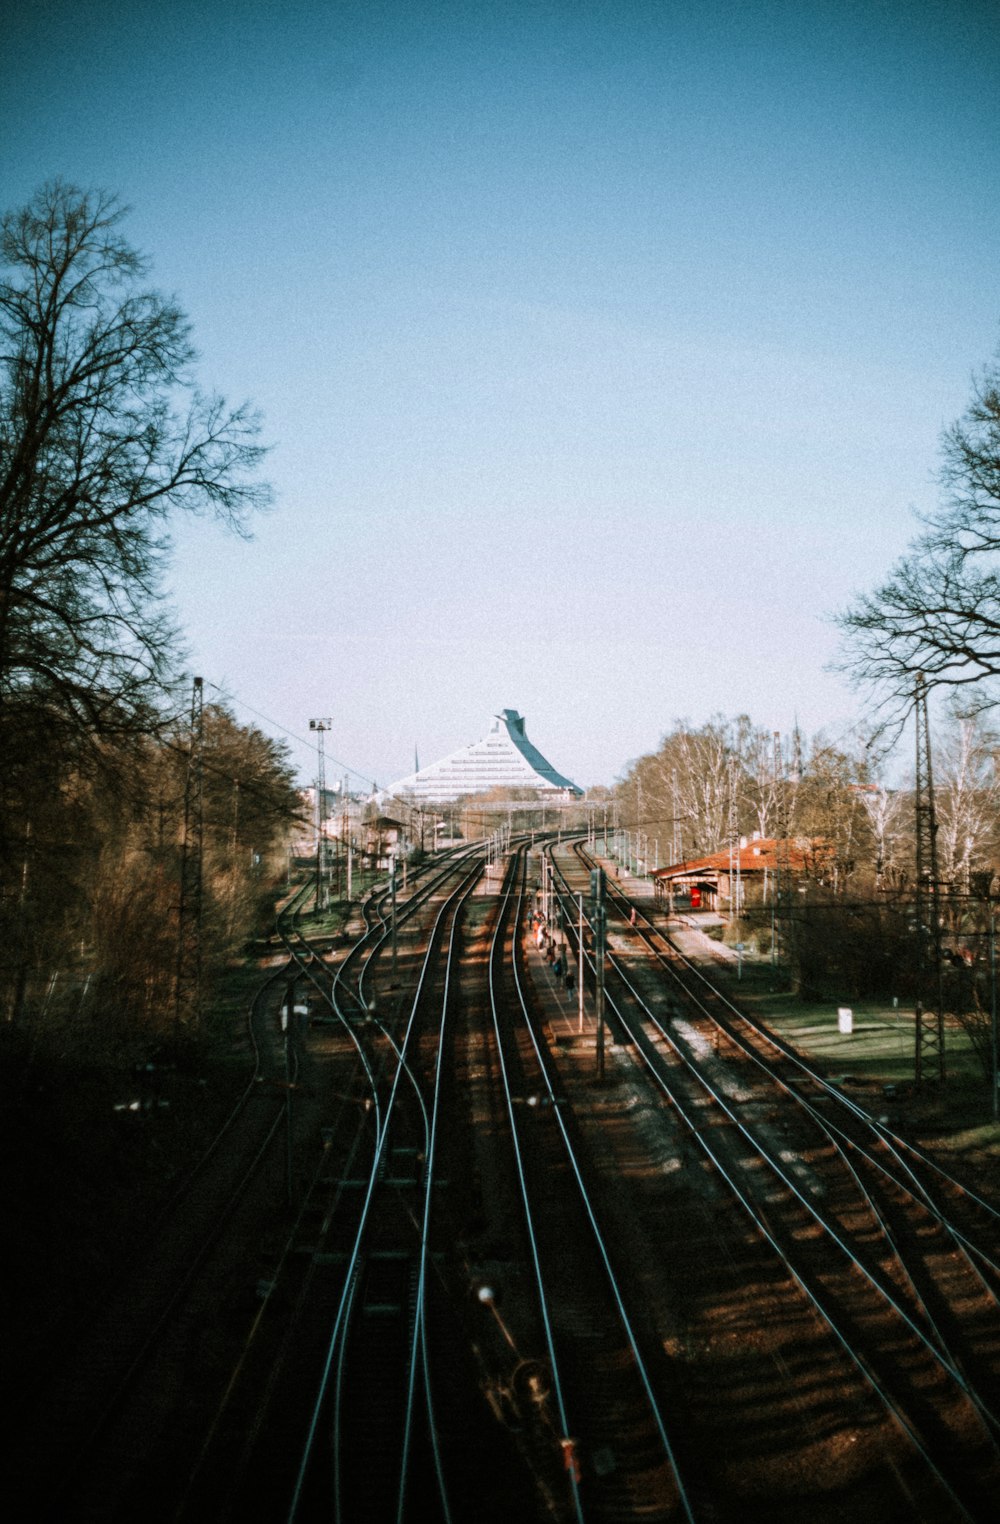 a view of a train track from a distance